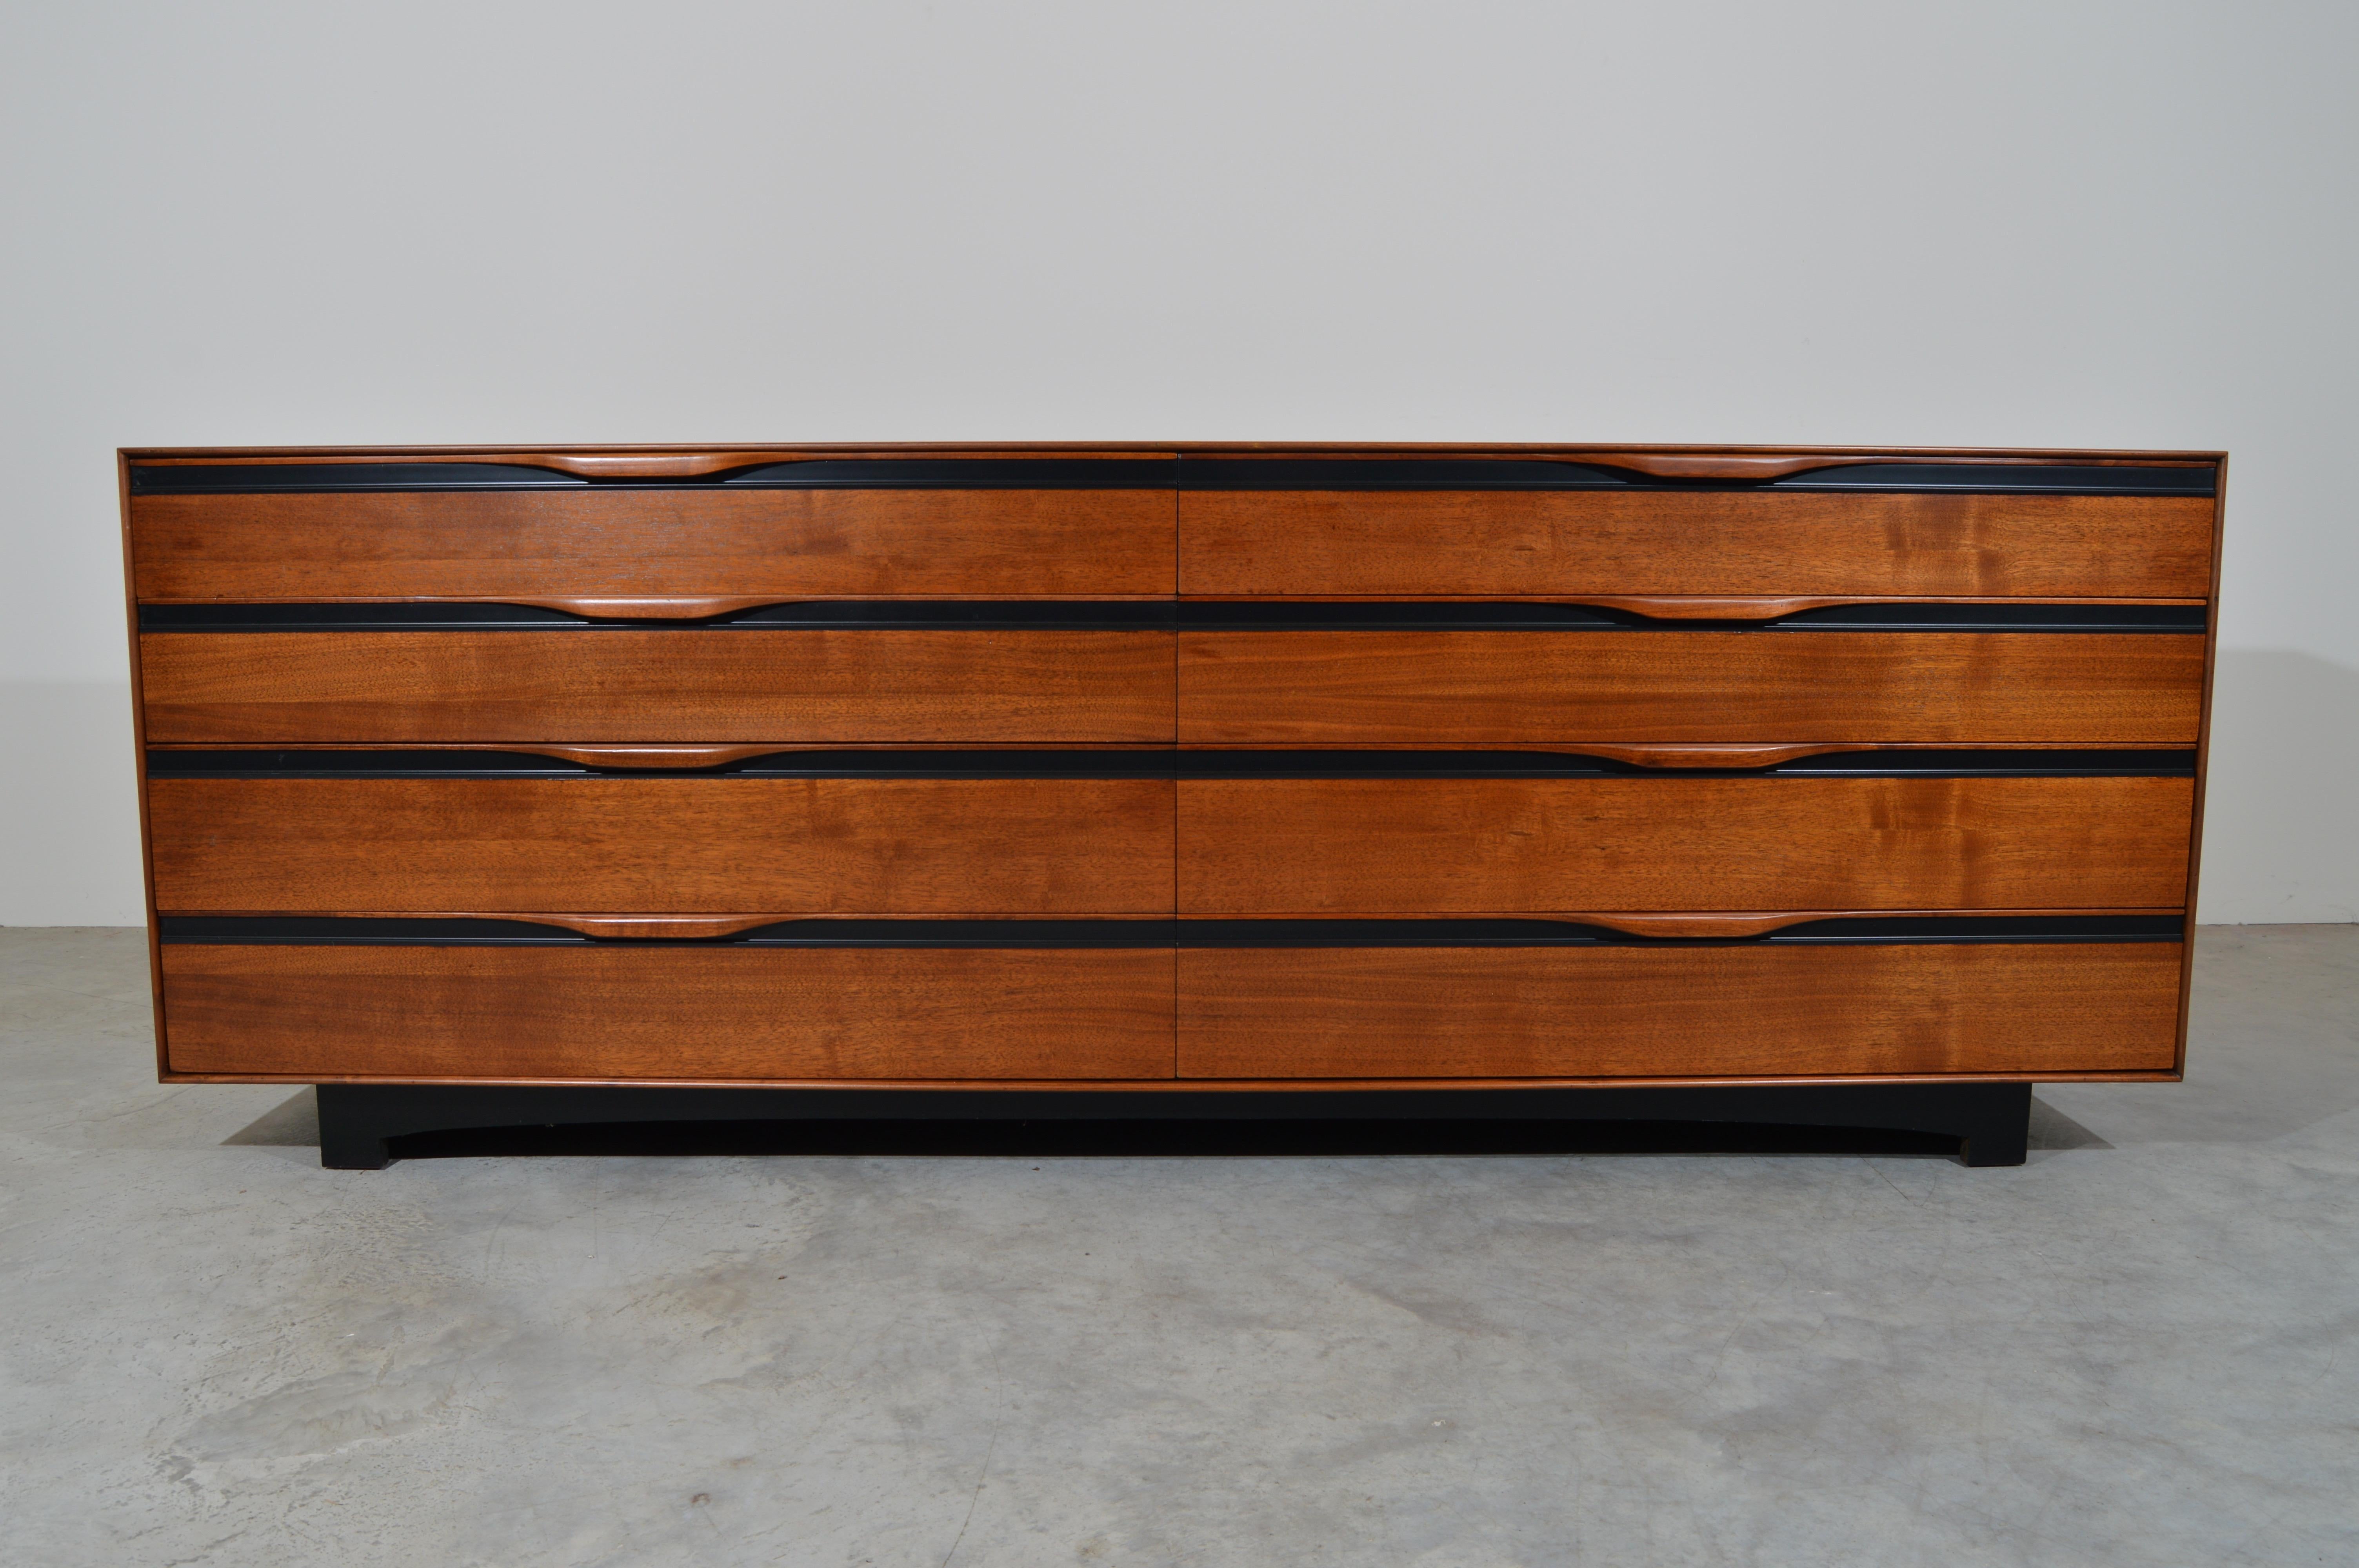 A beautiful mid-century walnut 8 drawer dresser having sculptural pulls with contrasted ebony accents throughout designed by John Kapel for Glenn of California. The drawers feature fully adjustable dividers so you can set them up however you like.